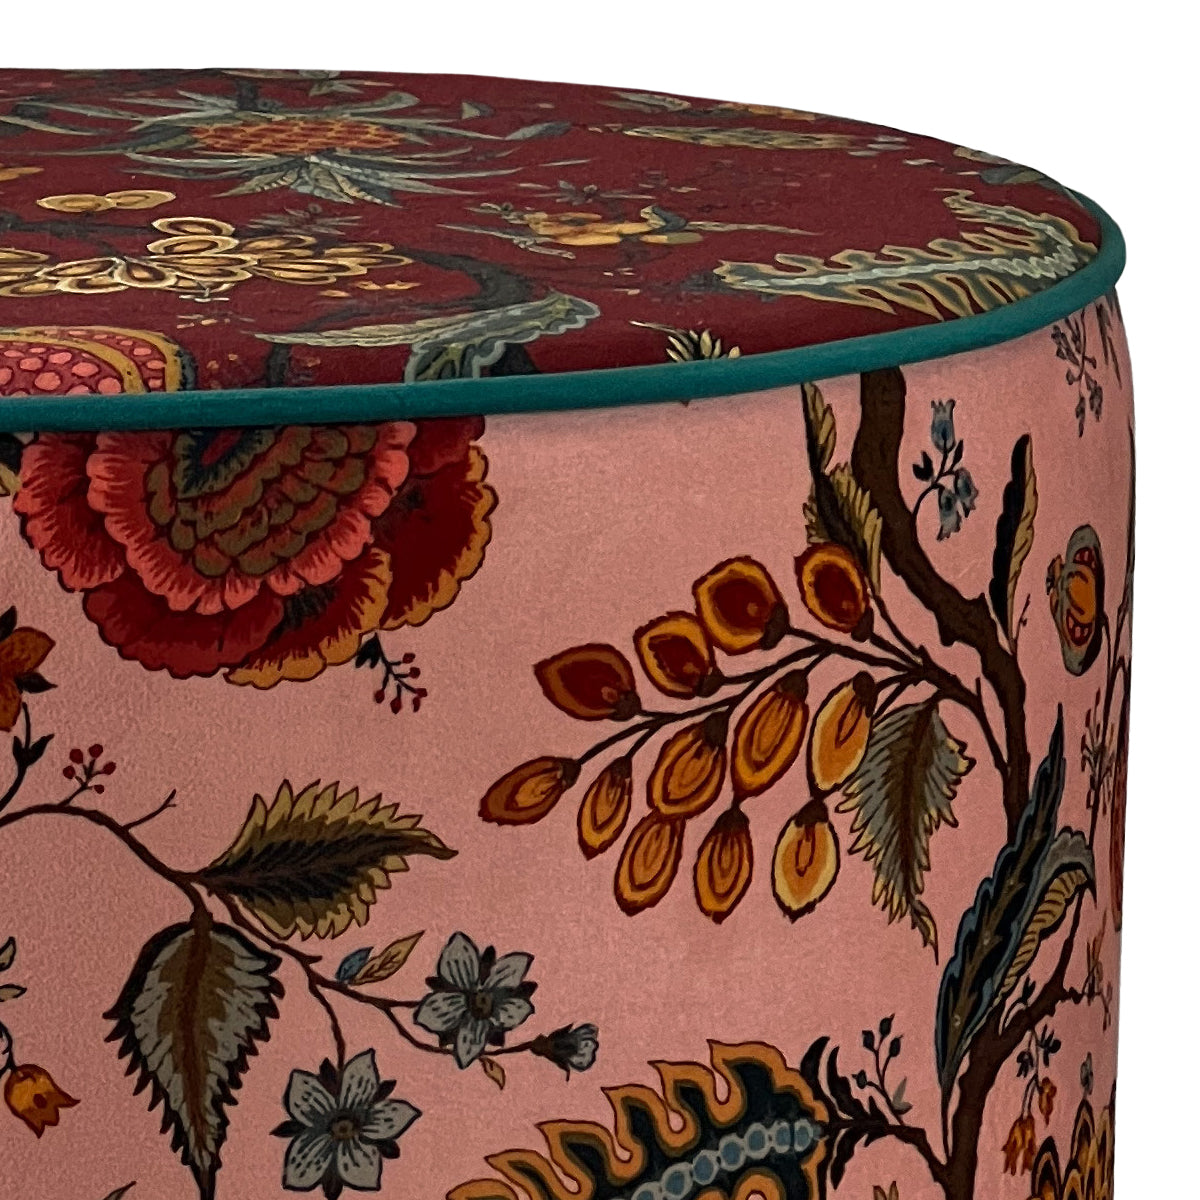 Pompadour Blush Pouffe, Footstool - Courthouse Exclusive Made in the UK